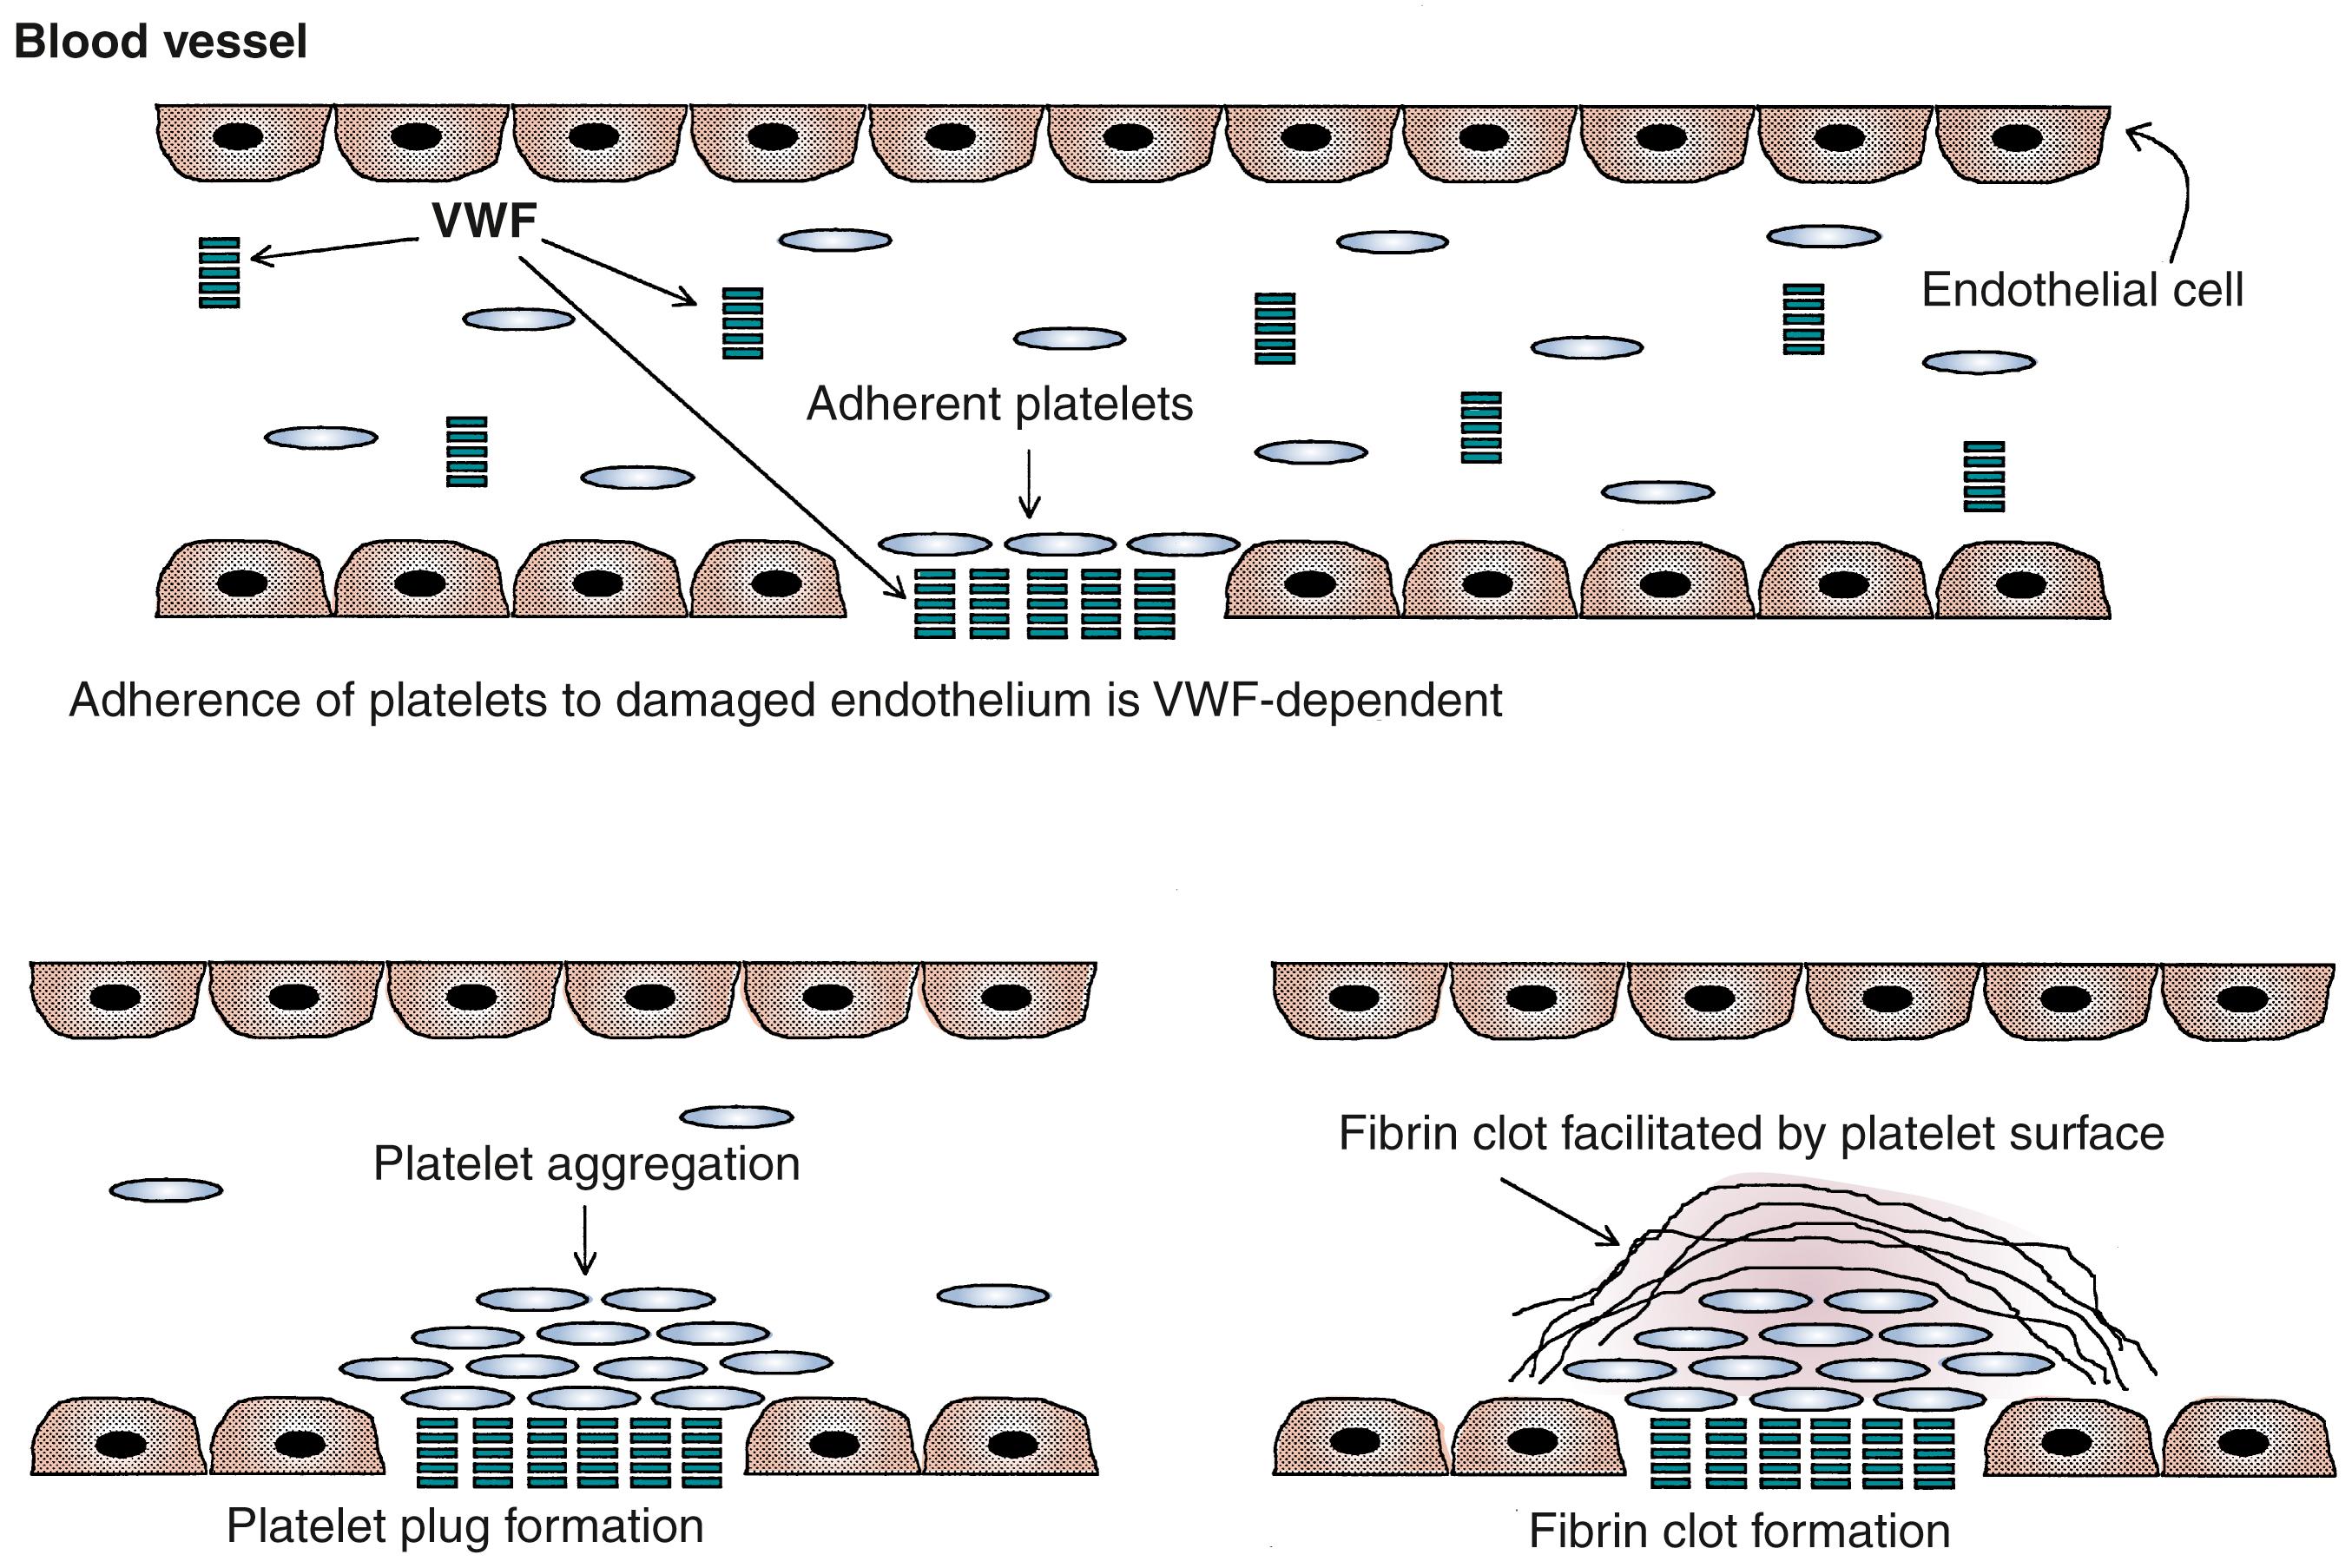 Fig. 51.3, The endothelial cell–platelet–von Willebrand factor (VWF) interaction that results in initiation of the normal platelet plug by the adhesion of platelets to damaged endothelium, mediated by VWF with subsequent formation of the platelet plug and fibrin clot.